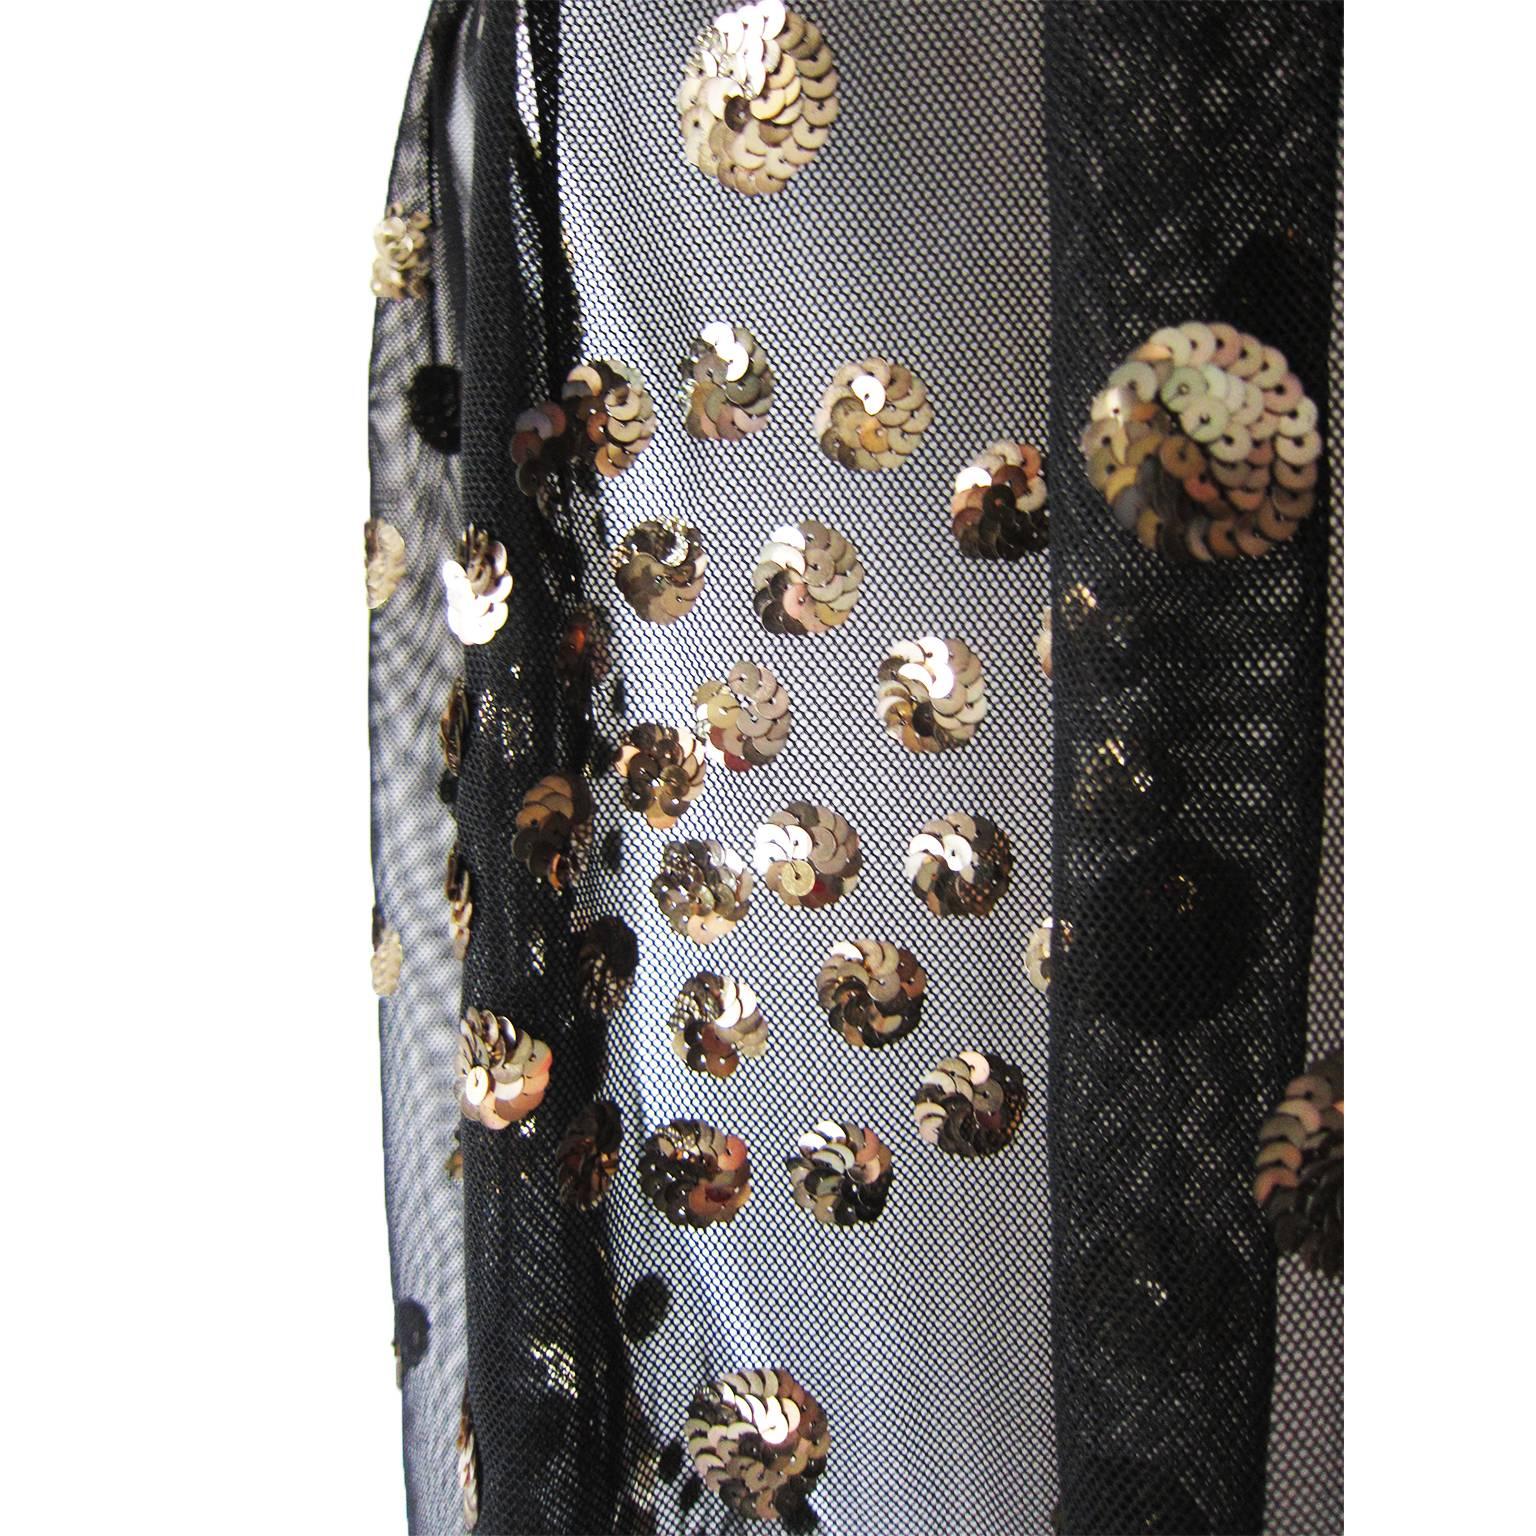 Black lace scarf wrap futures various sizes silver sequin polka dots with semi circle edges.

